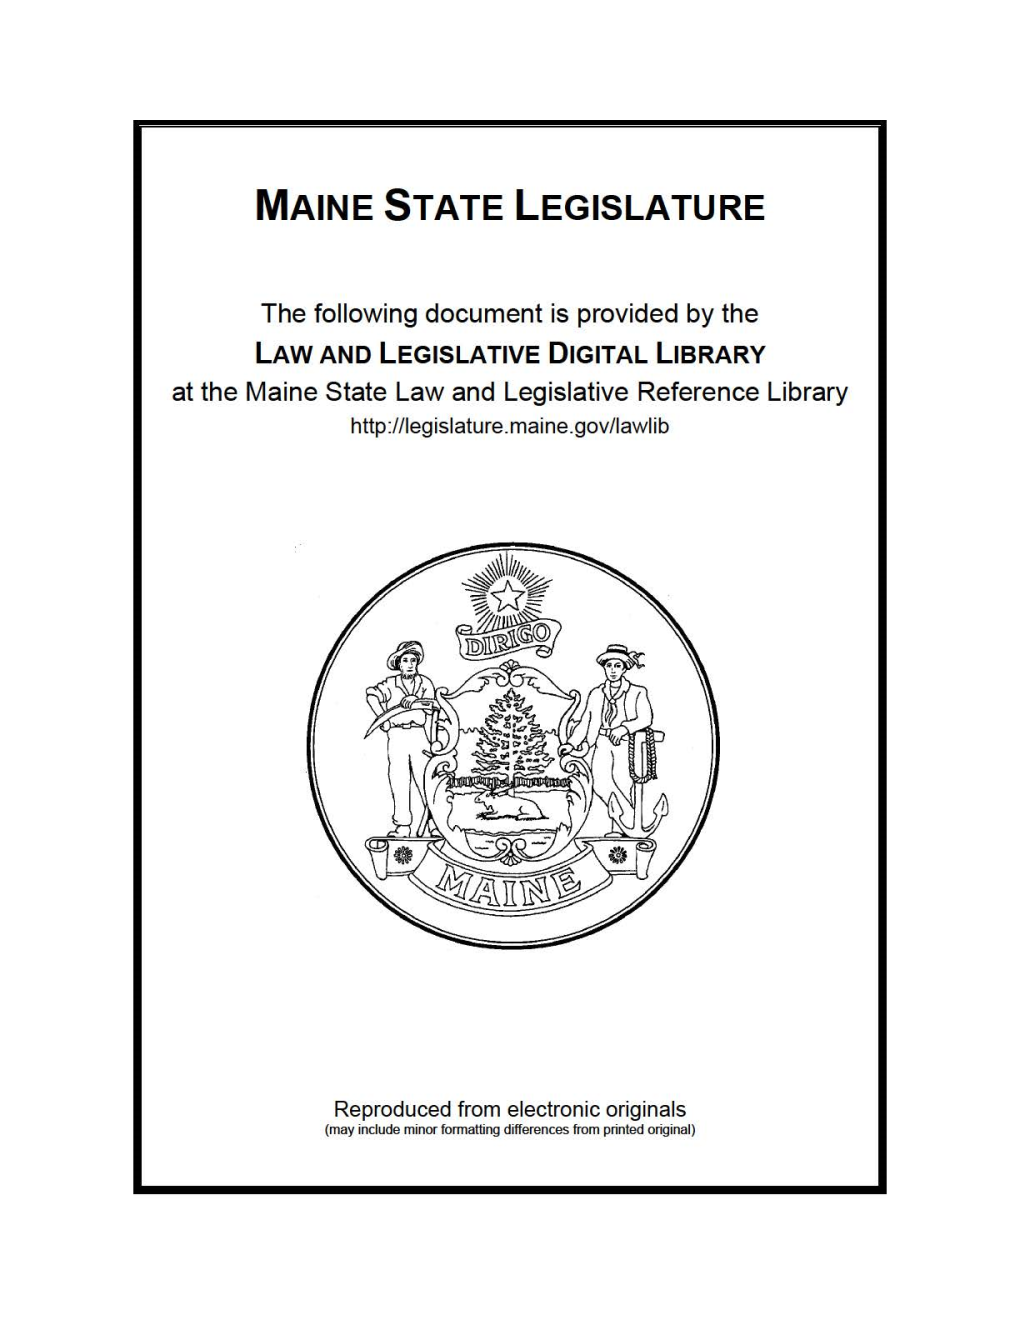 Maine State Planning Office and the Maine Department of Marine Resources